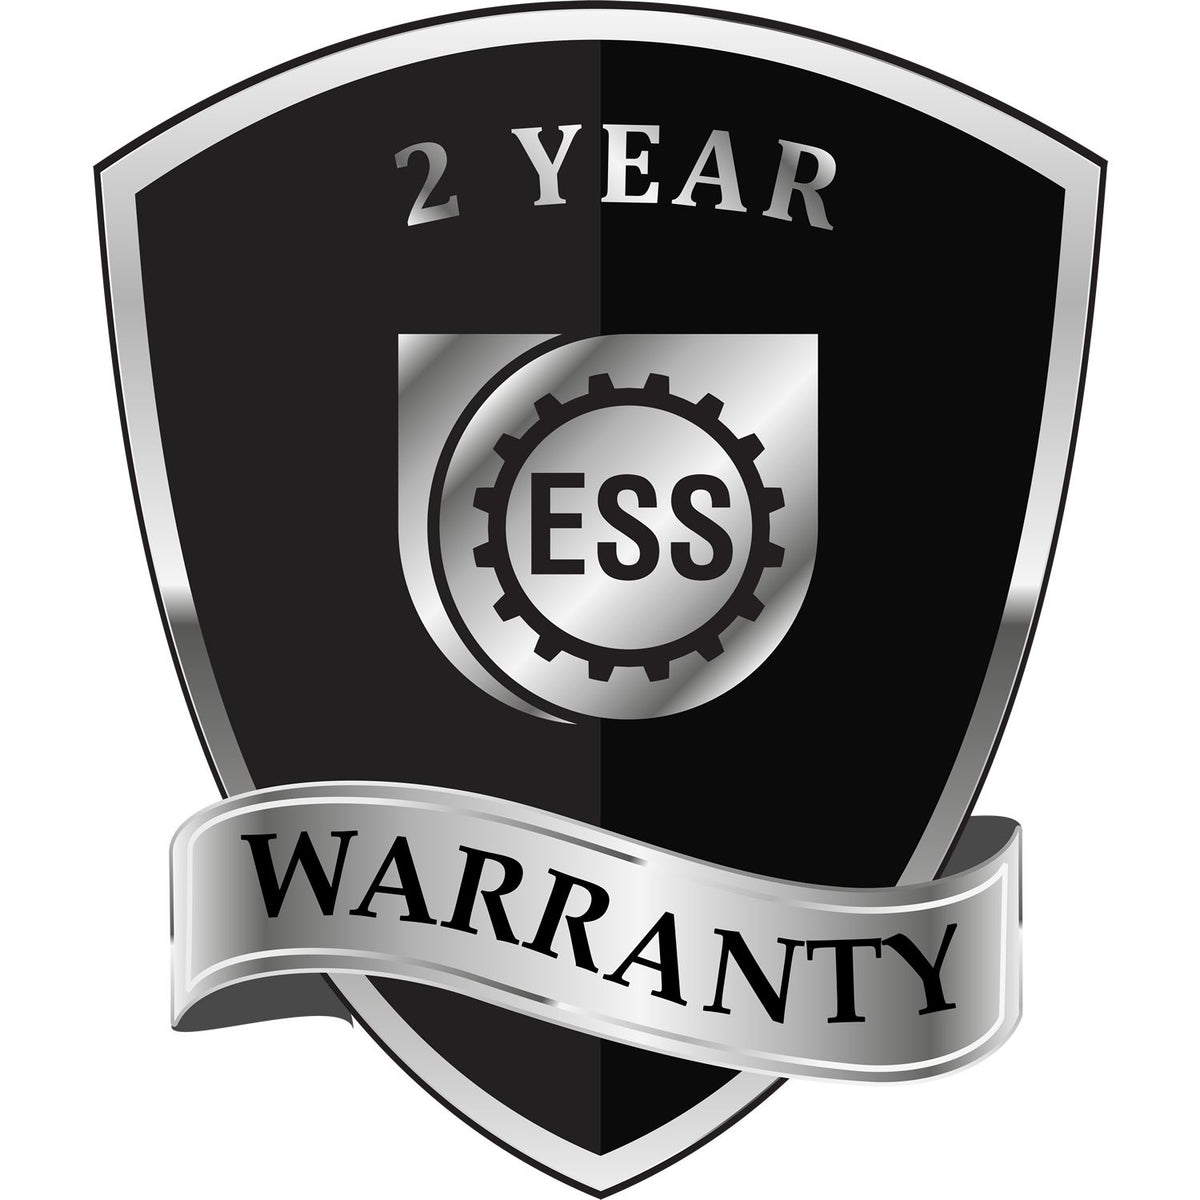 A badge or emblem showing a warranty icon for the Extended Long Reach Florida Architect Seal Embosser